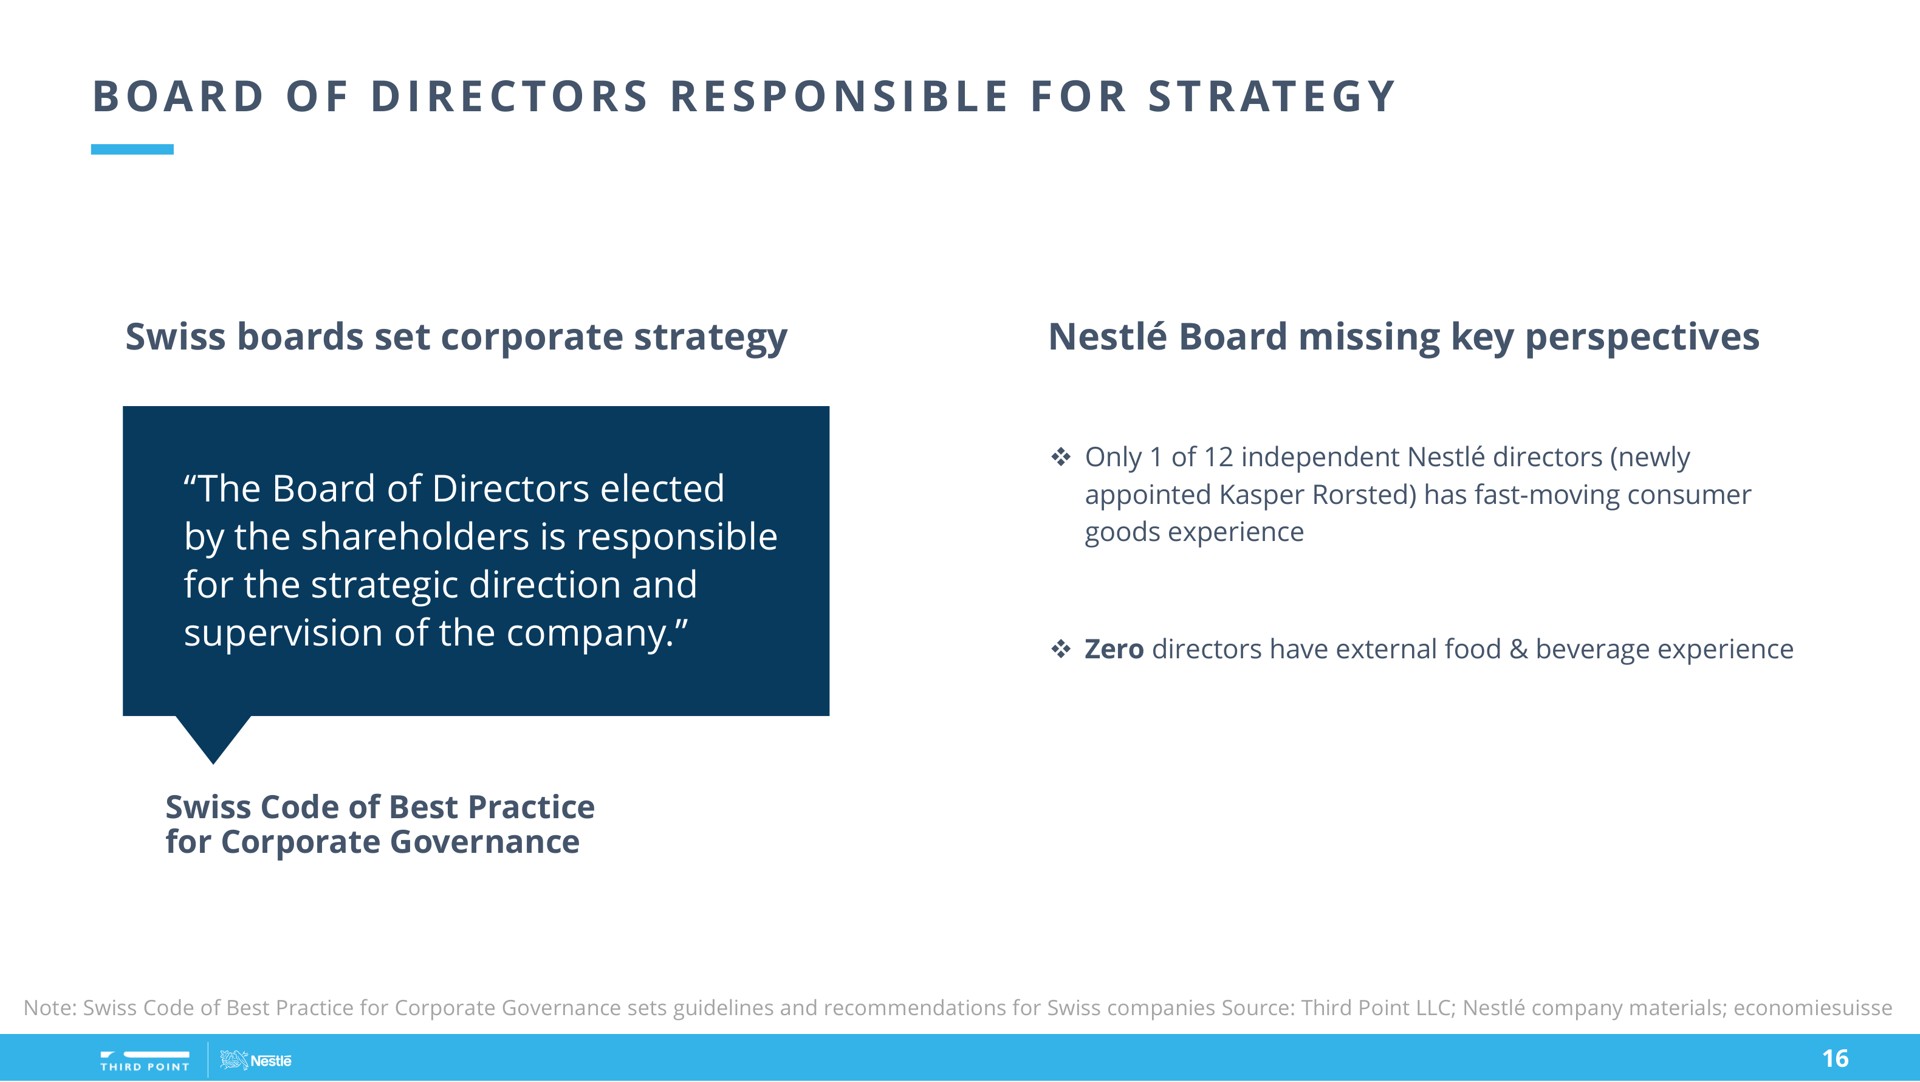 a i i at board of directors responsible for strategy | Third Point Management